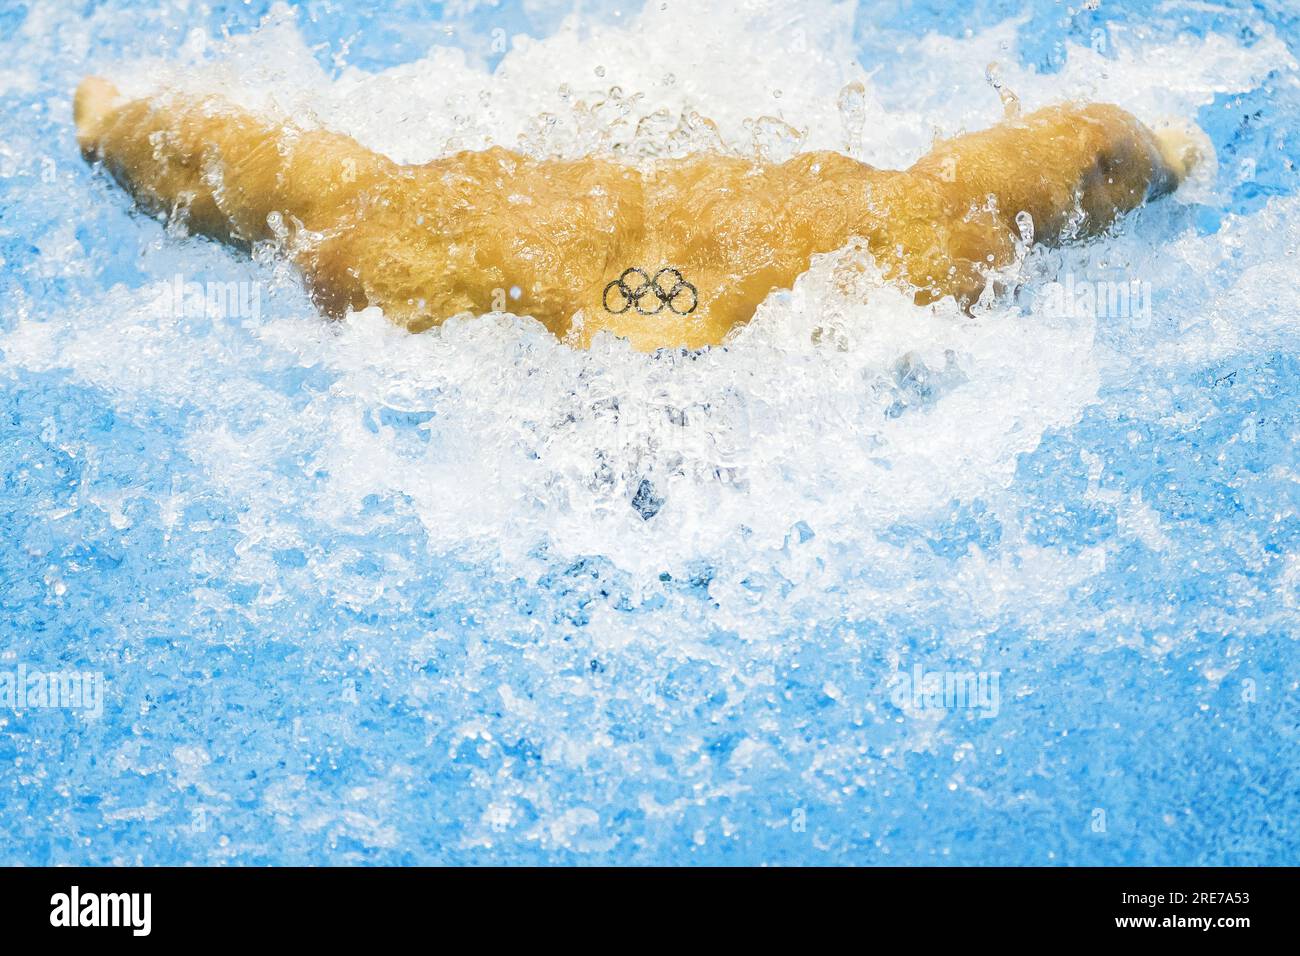 FUKUOKA - Nyls Korstanje in action on the 4x100 meter relay (mixed) during the fourth day of the World Swimming Championships in Japan. ANP KOEN VAN WEEL Stock Photo